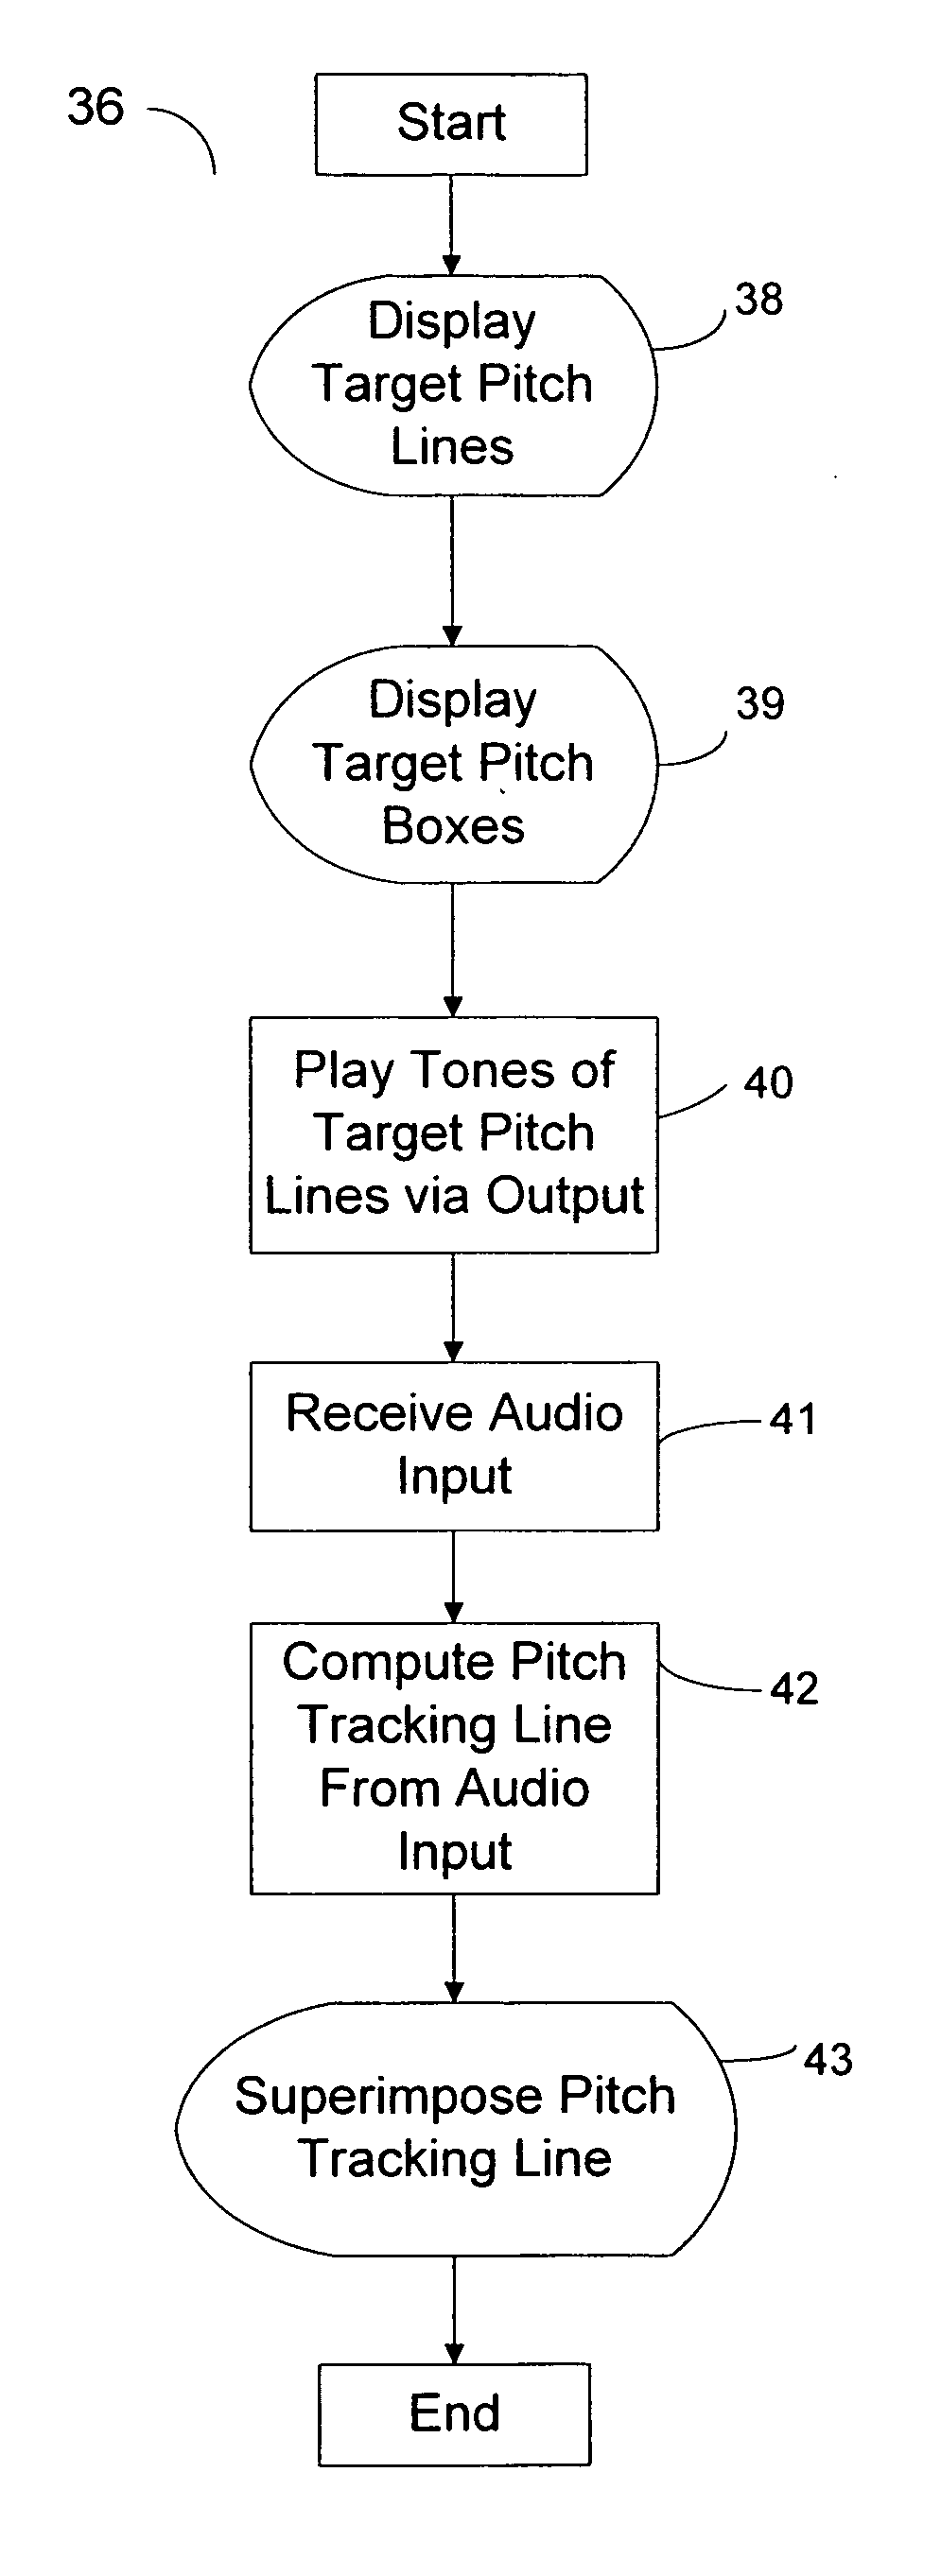 Computer-aided learning system employing a pitch tracking line